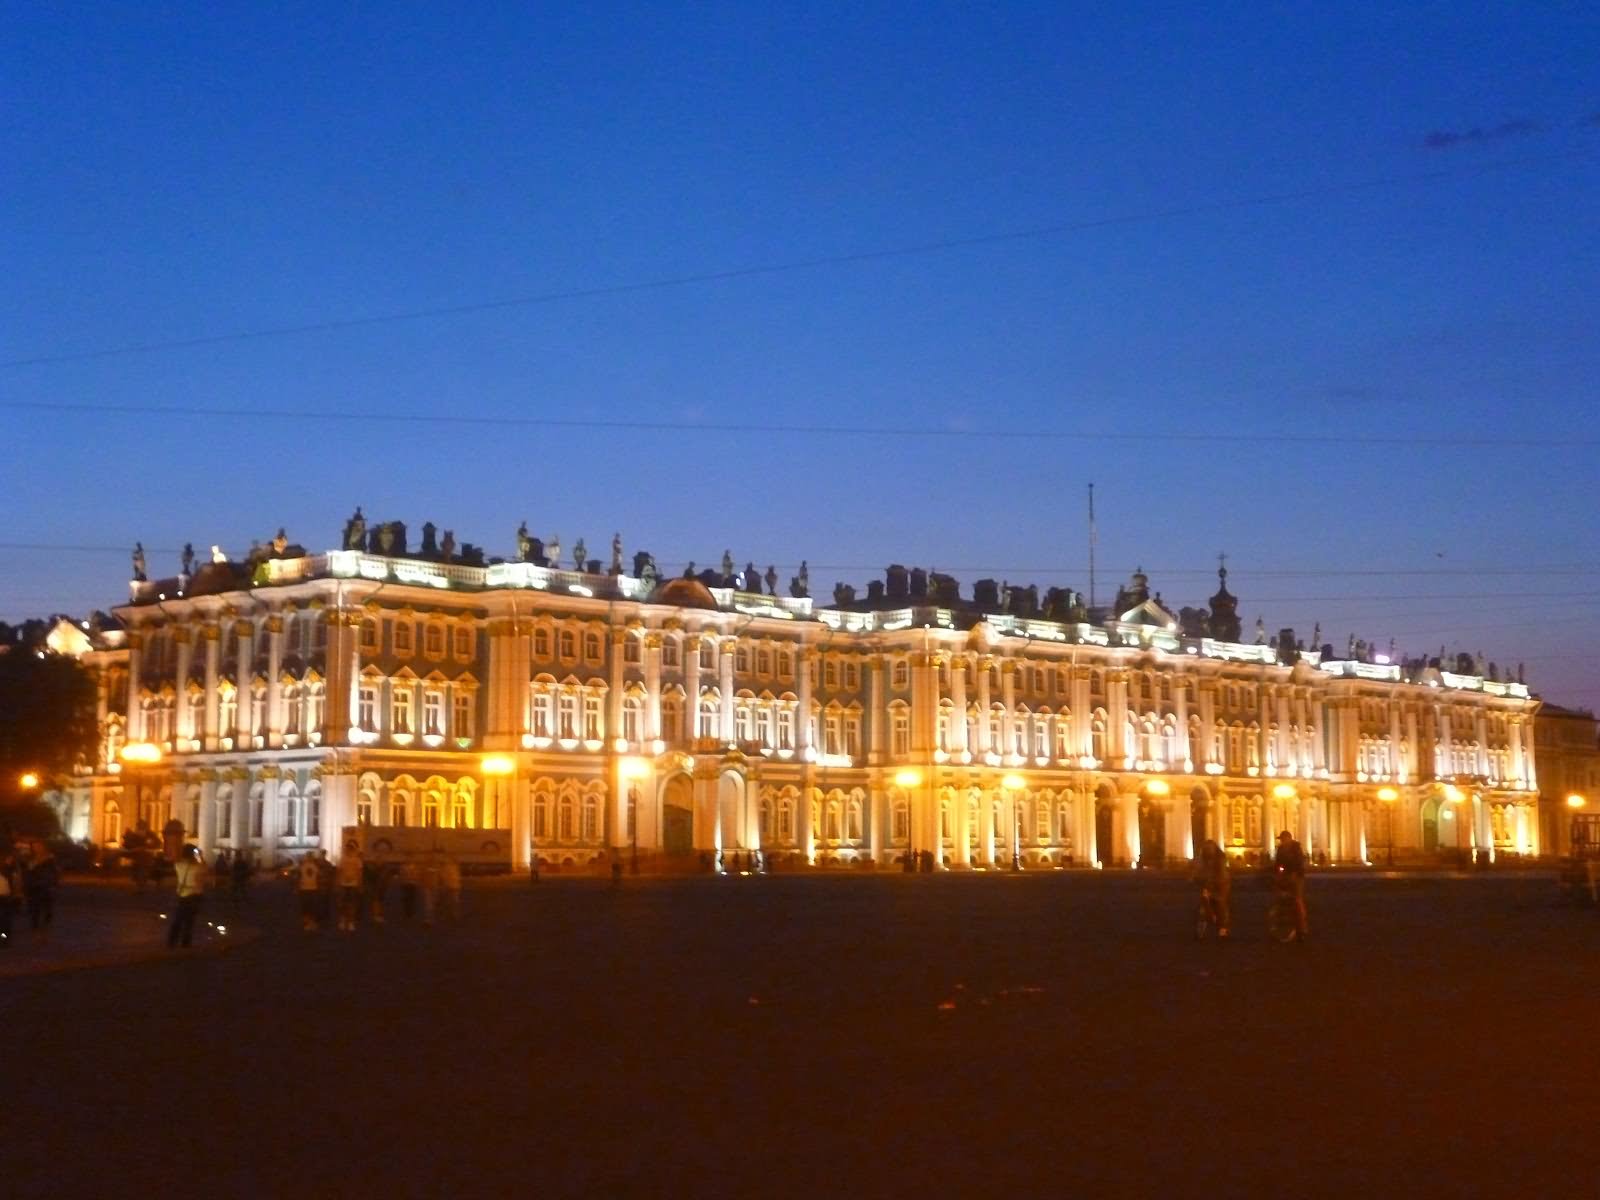 The Hermitage Museum In Saint Petersburg Lit Up At Night